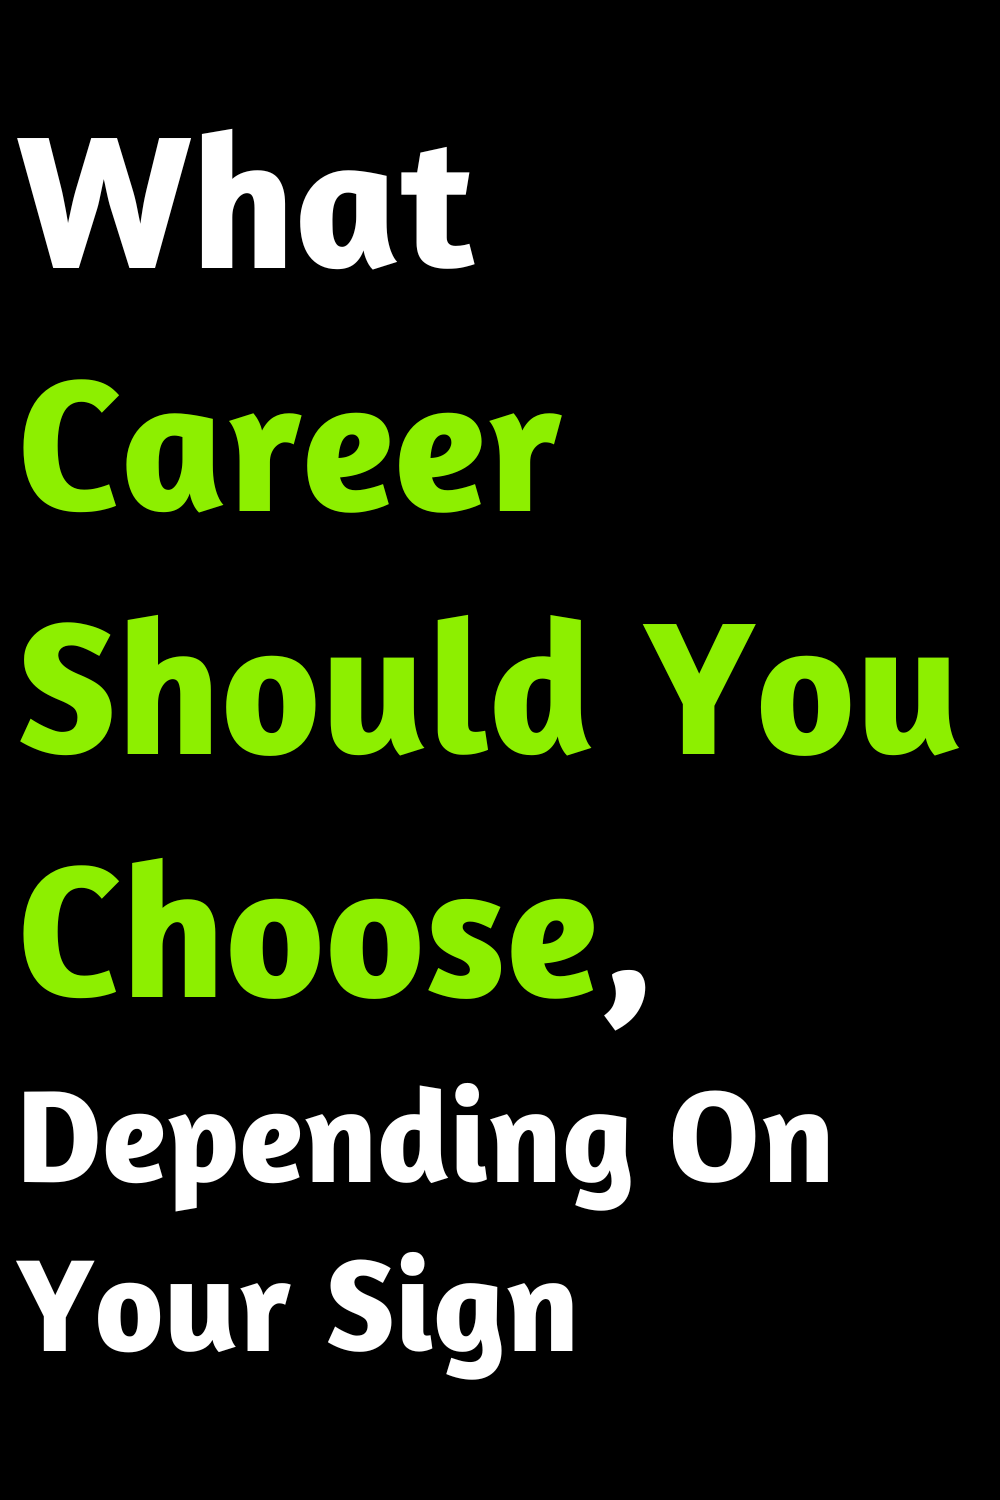 What Career Should You Choose, Depending On Your Sign